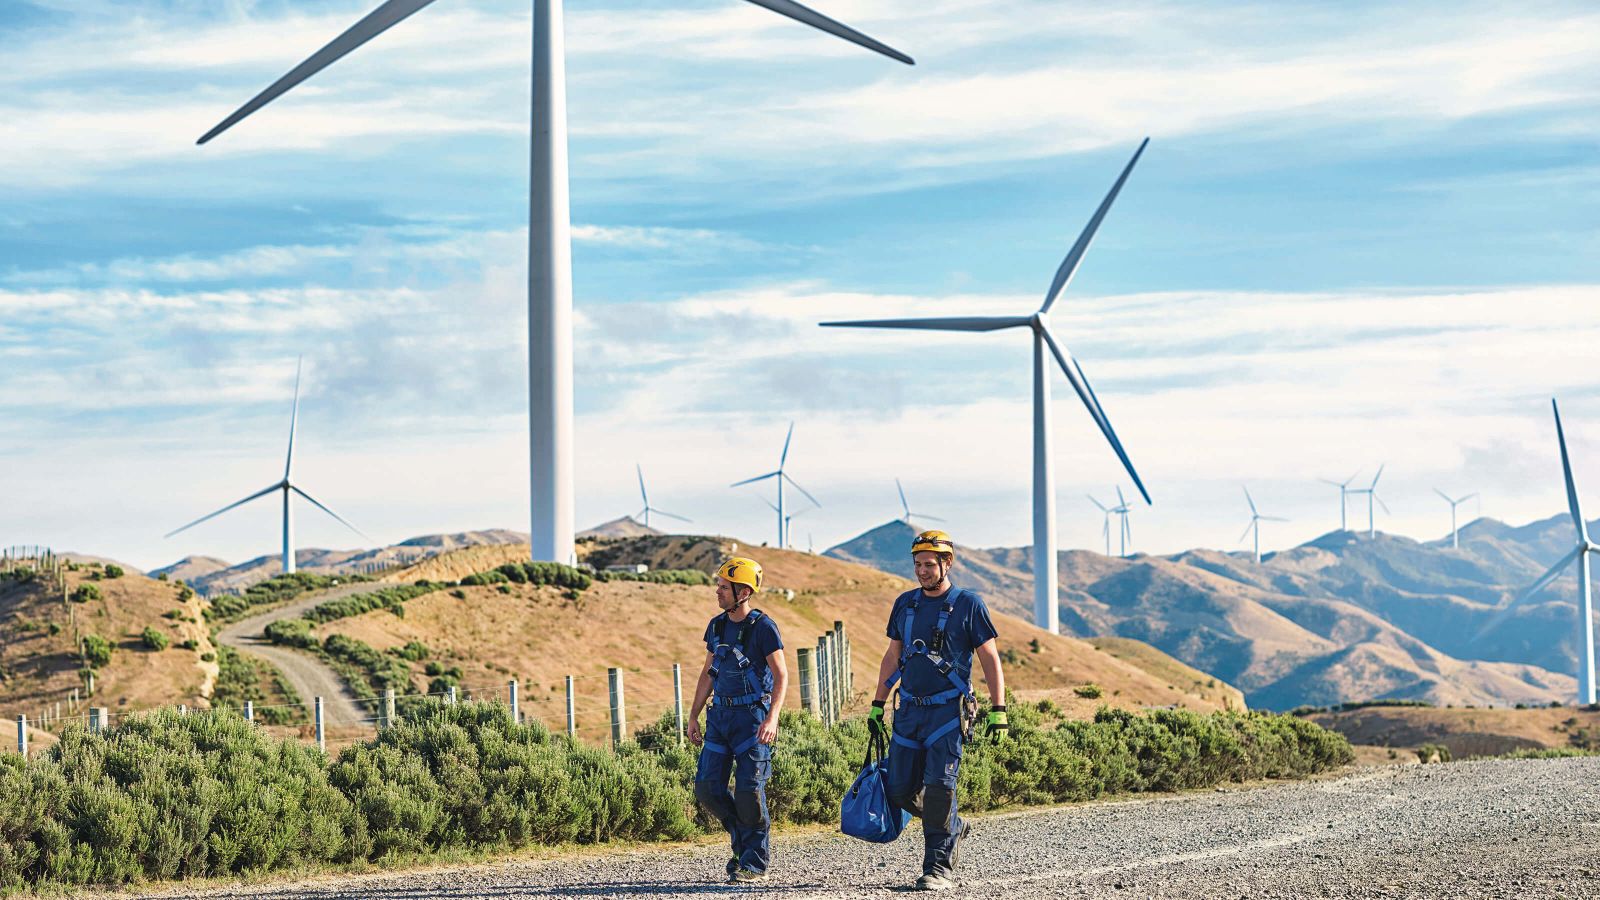 Two wind turbine workers wearing a safety harness and yellow hard hats, walk down a gravel road with many wind turbines in the background.